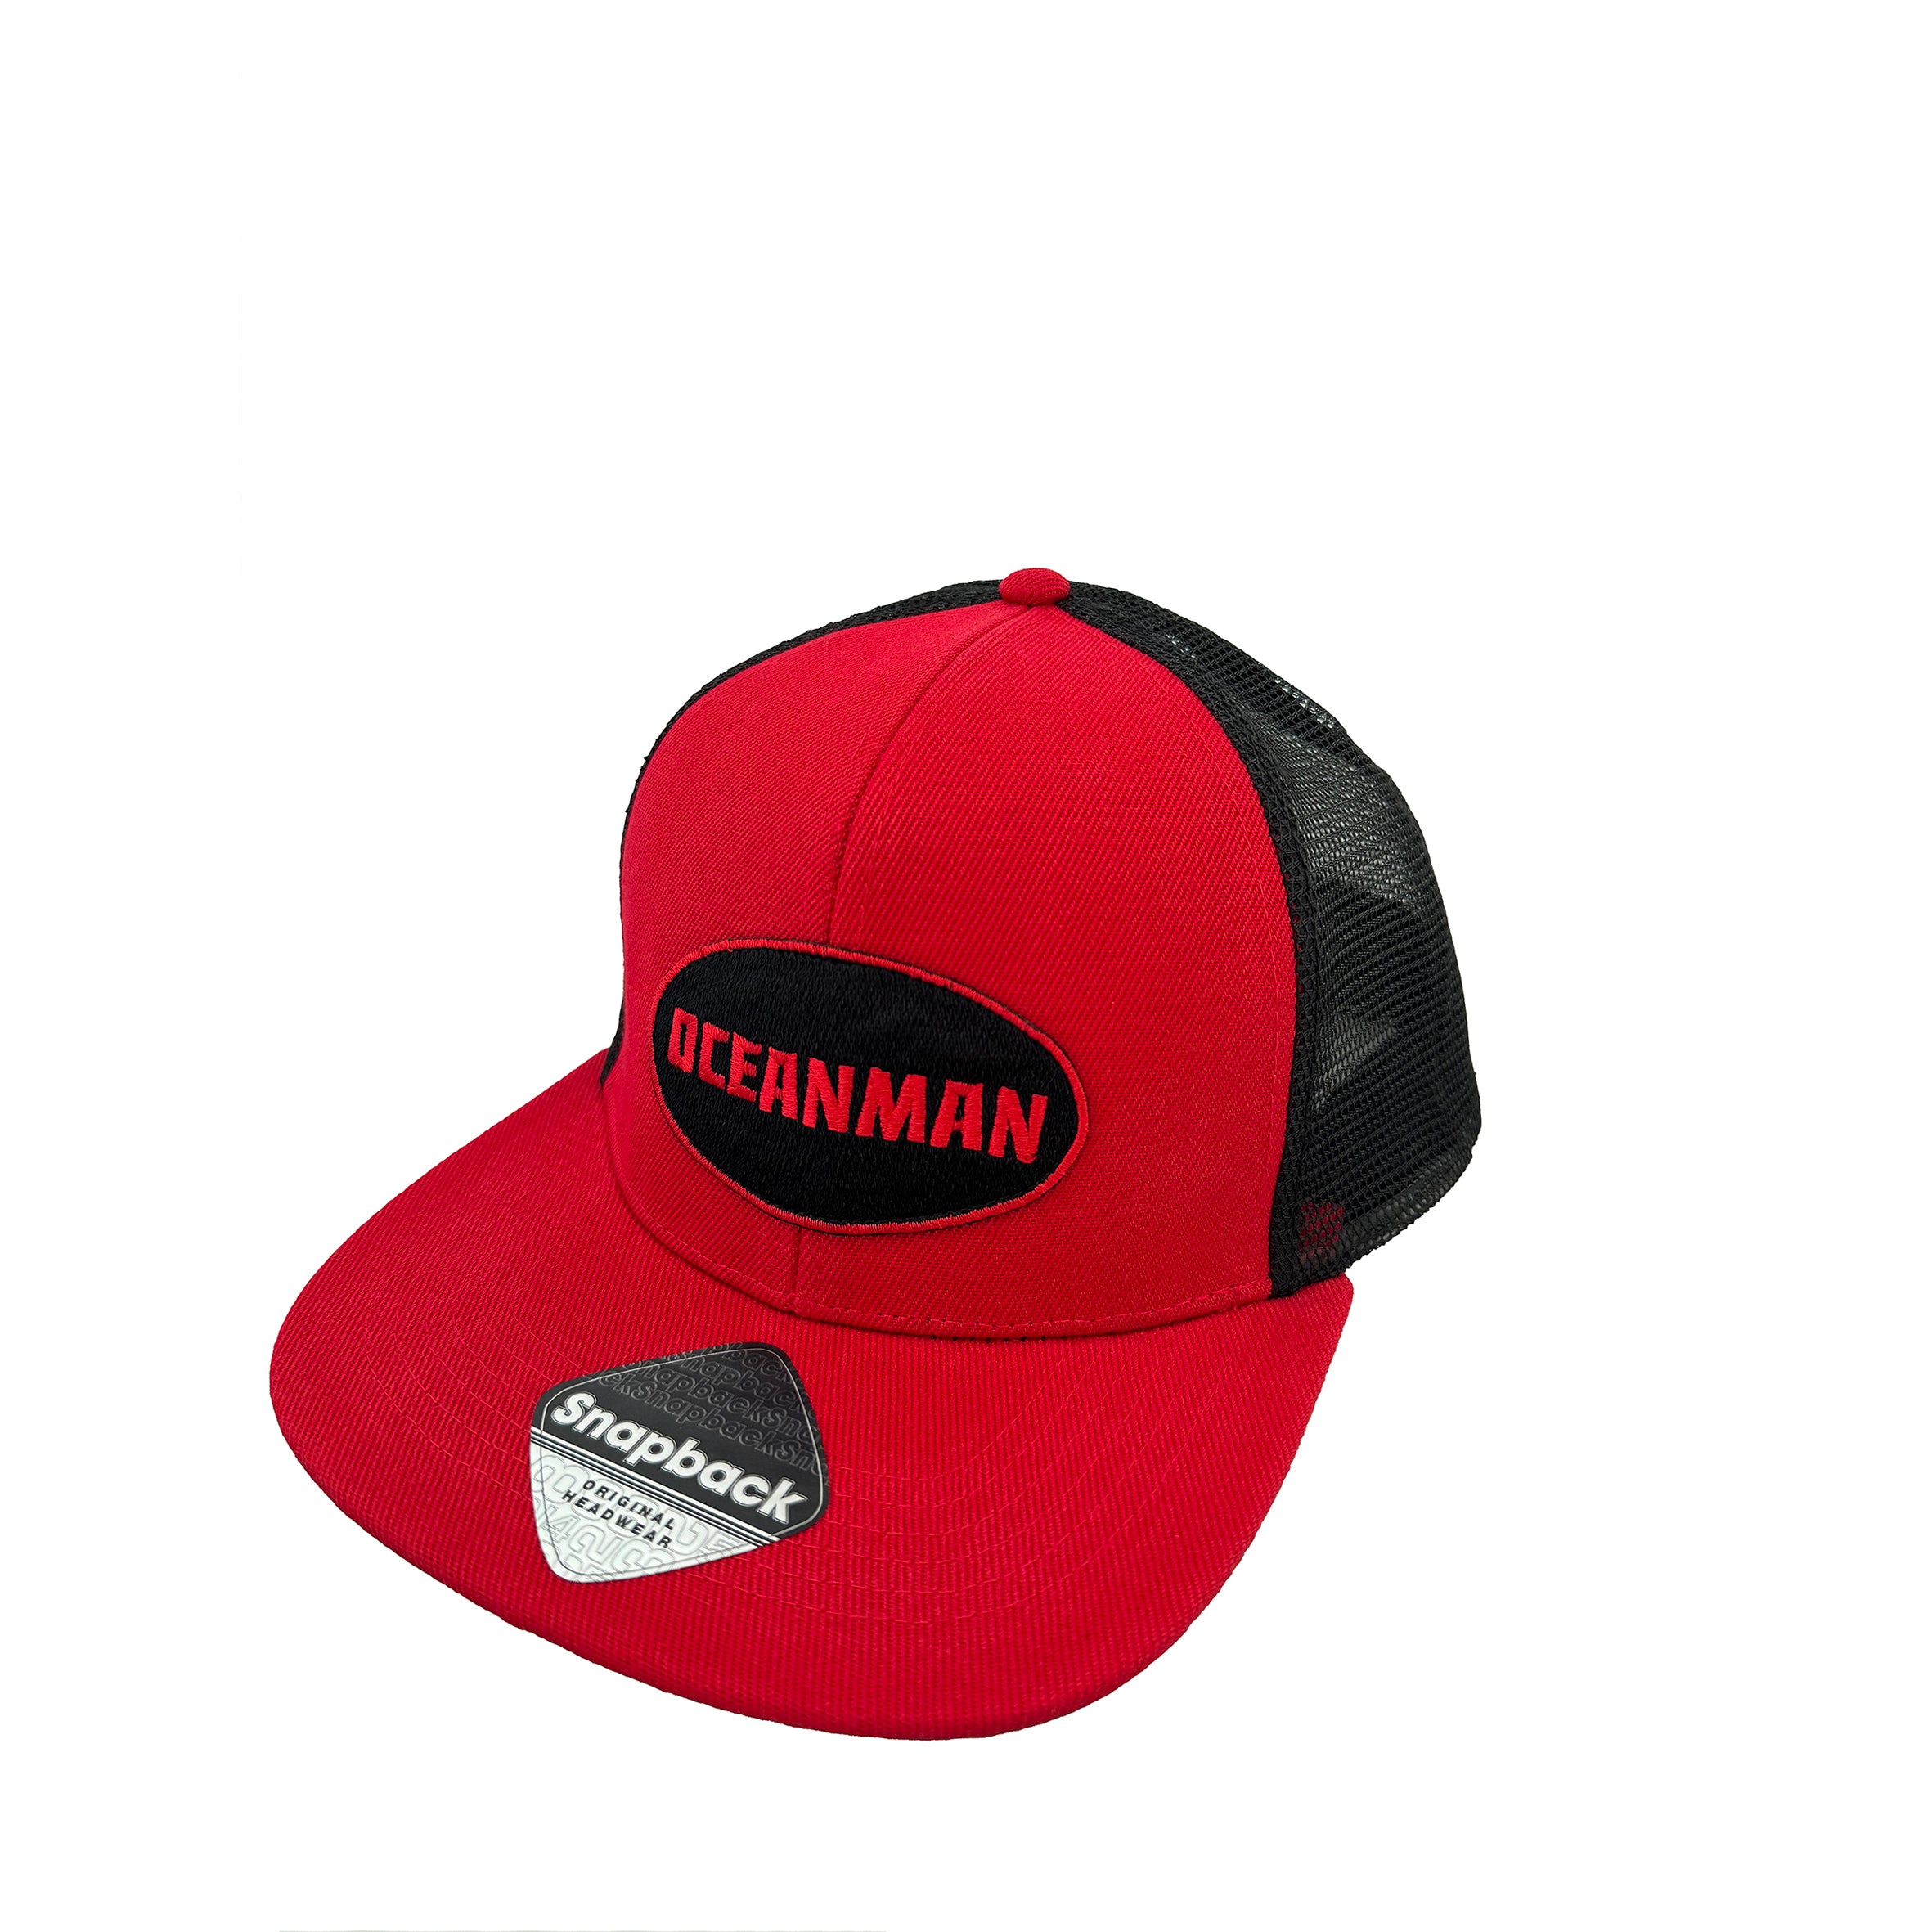 NEW WAVE CAP Red